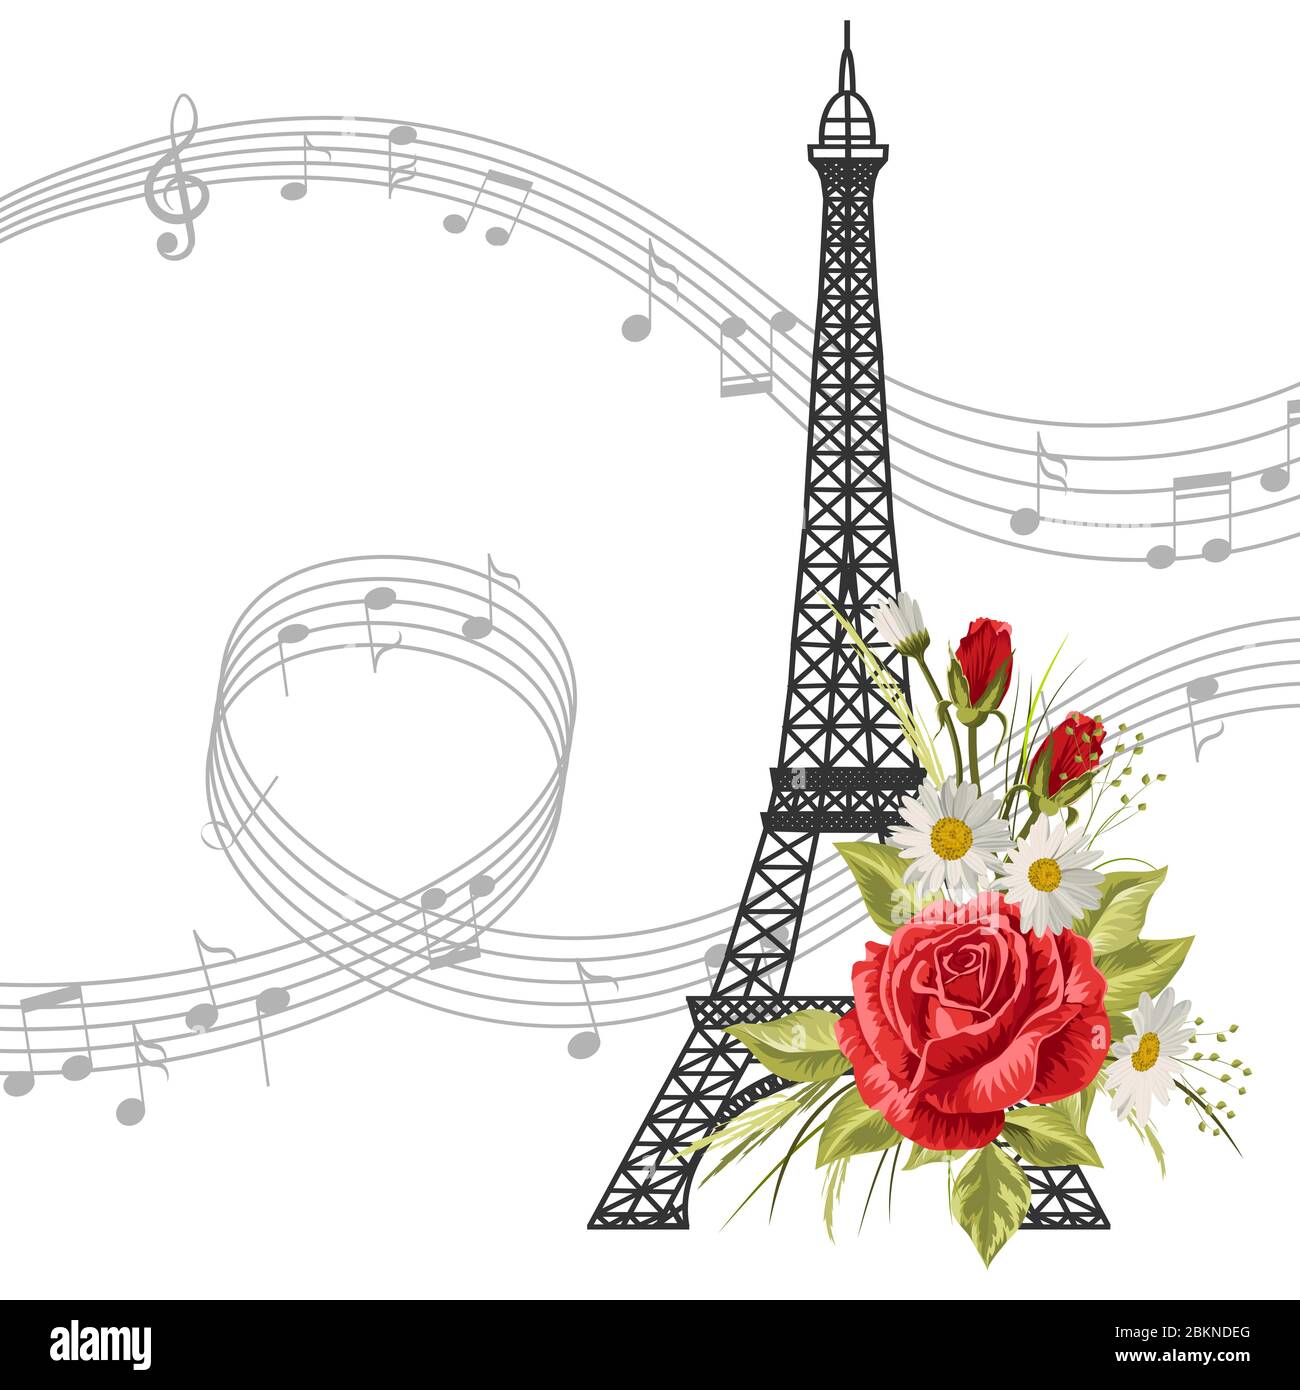 Eiffel Tower with flowers and music notes isolated on white background Stock Vector